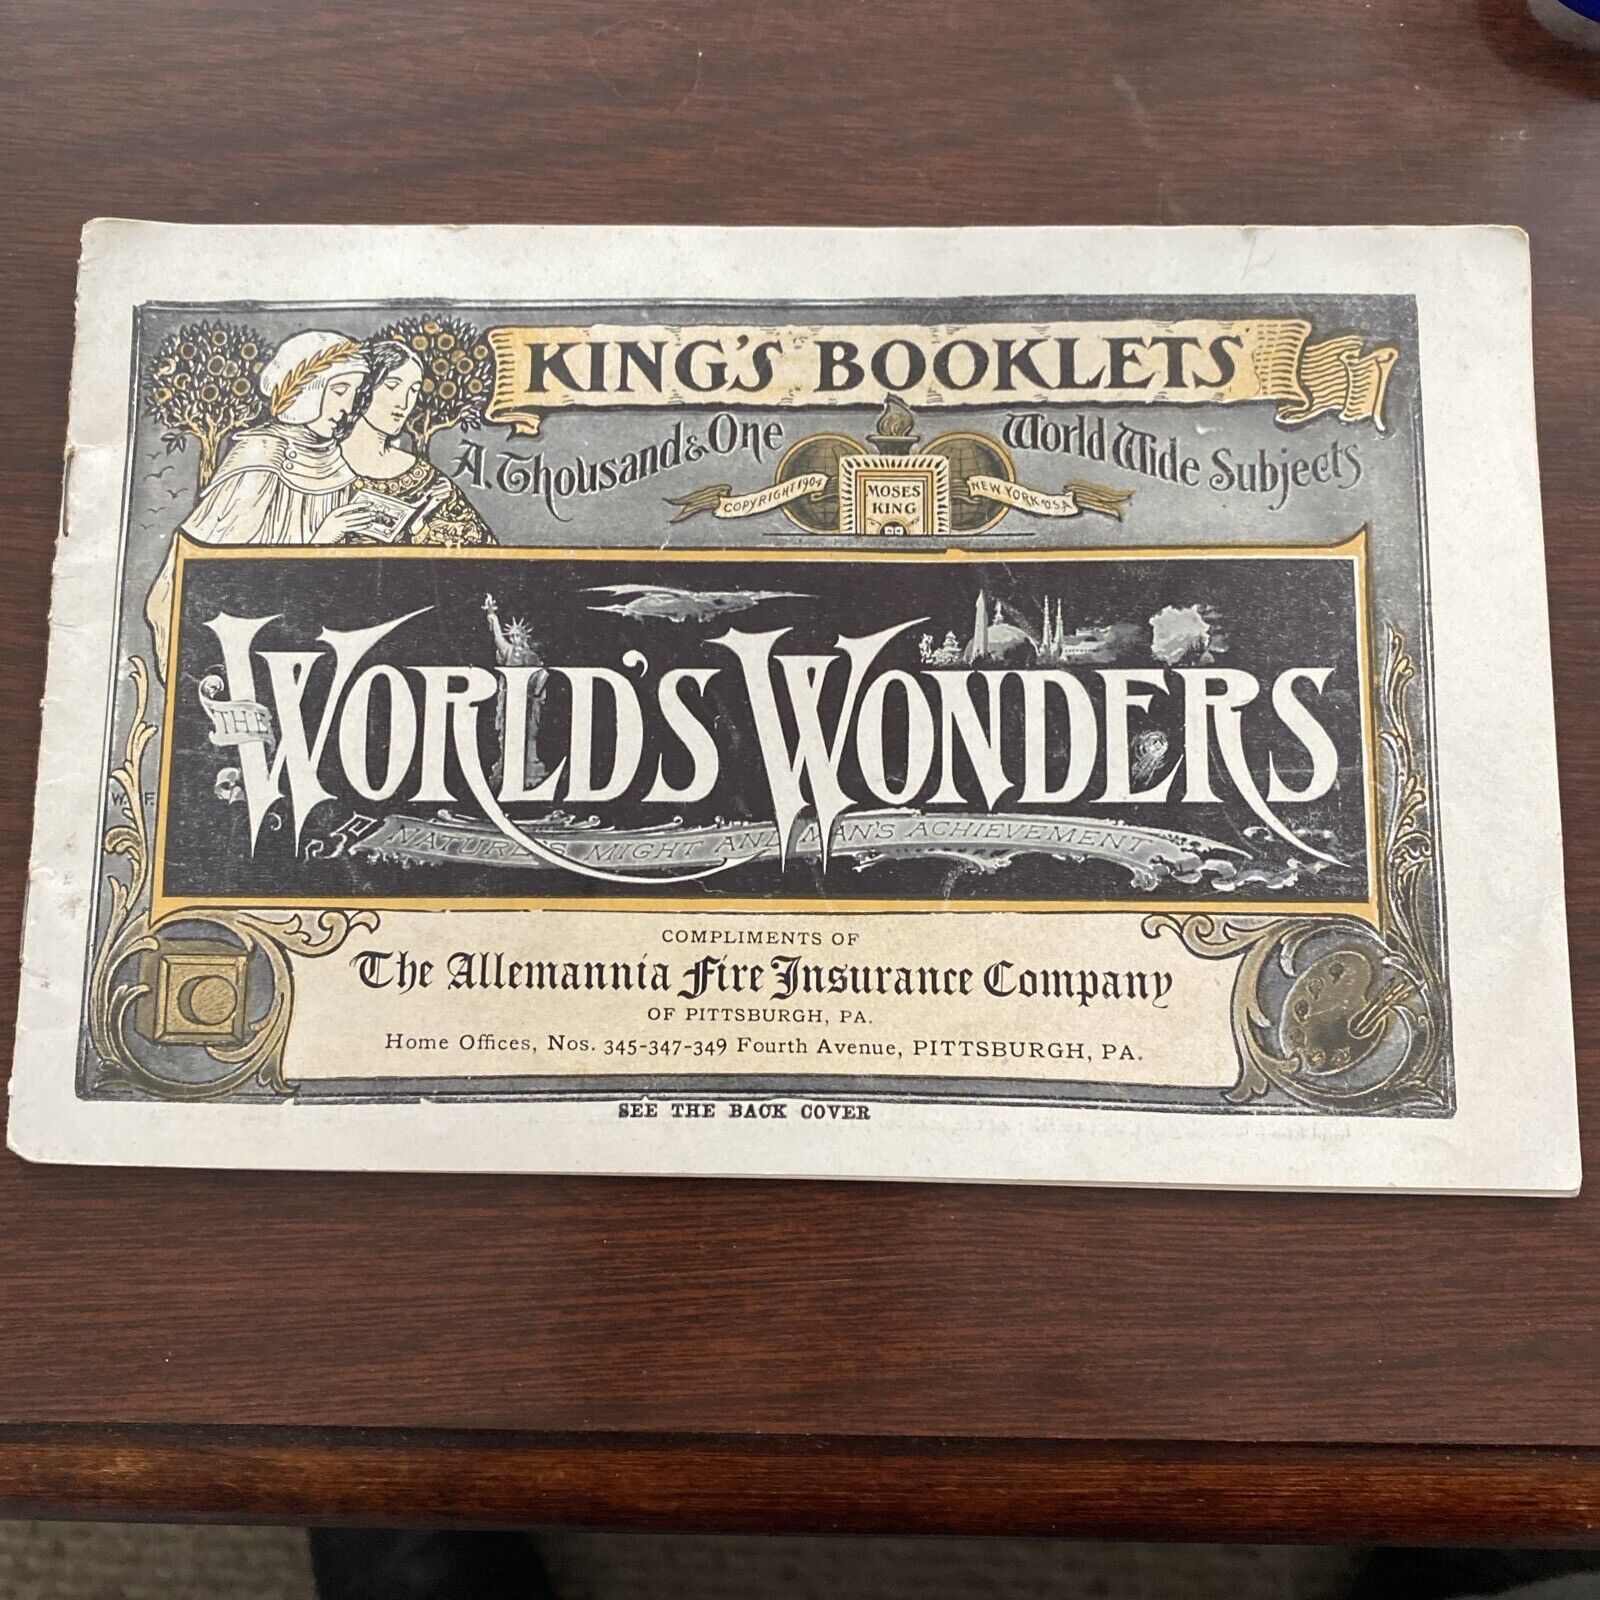 1909 King’s Booklets The World’s Wonders Allemannia Fire Insurance Company